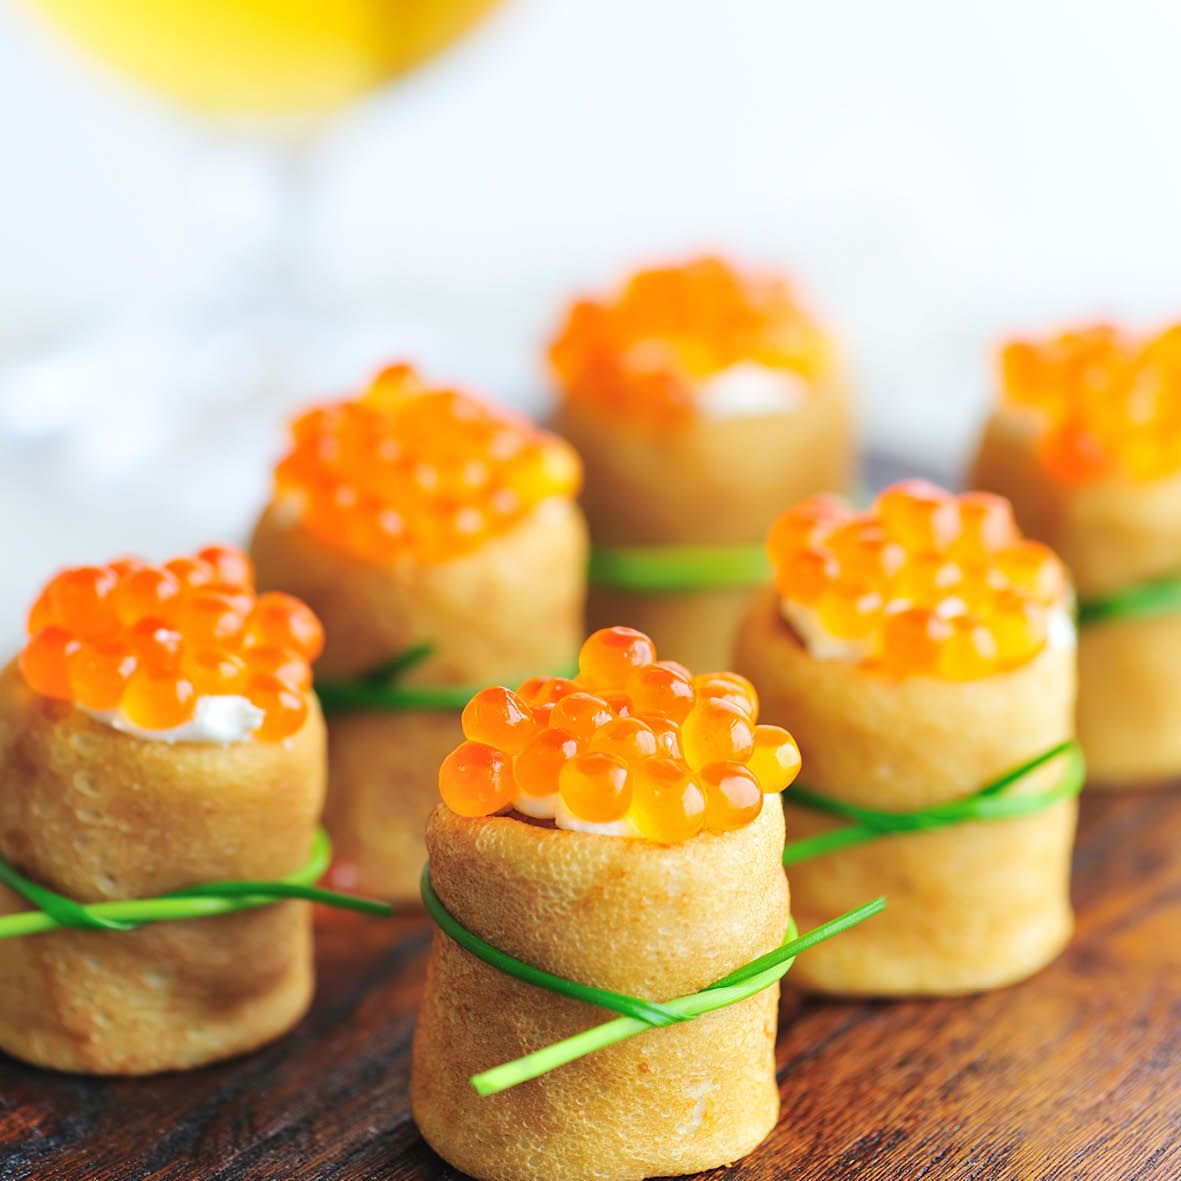 Huon_Reserve_Hand_Milked_Trout_Caviar_in_Blini_Baskets.jpg